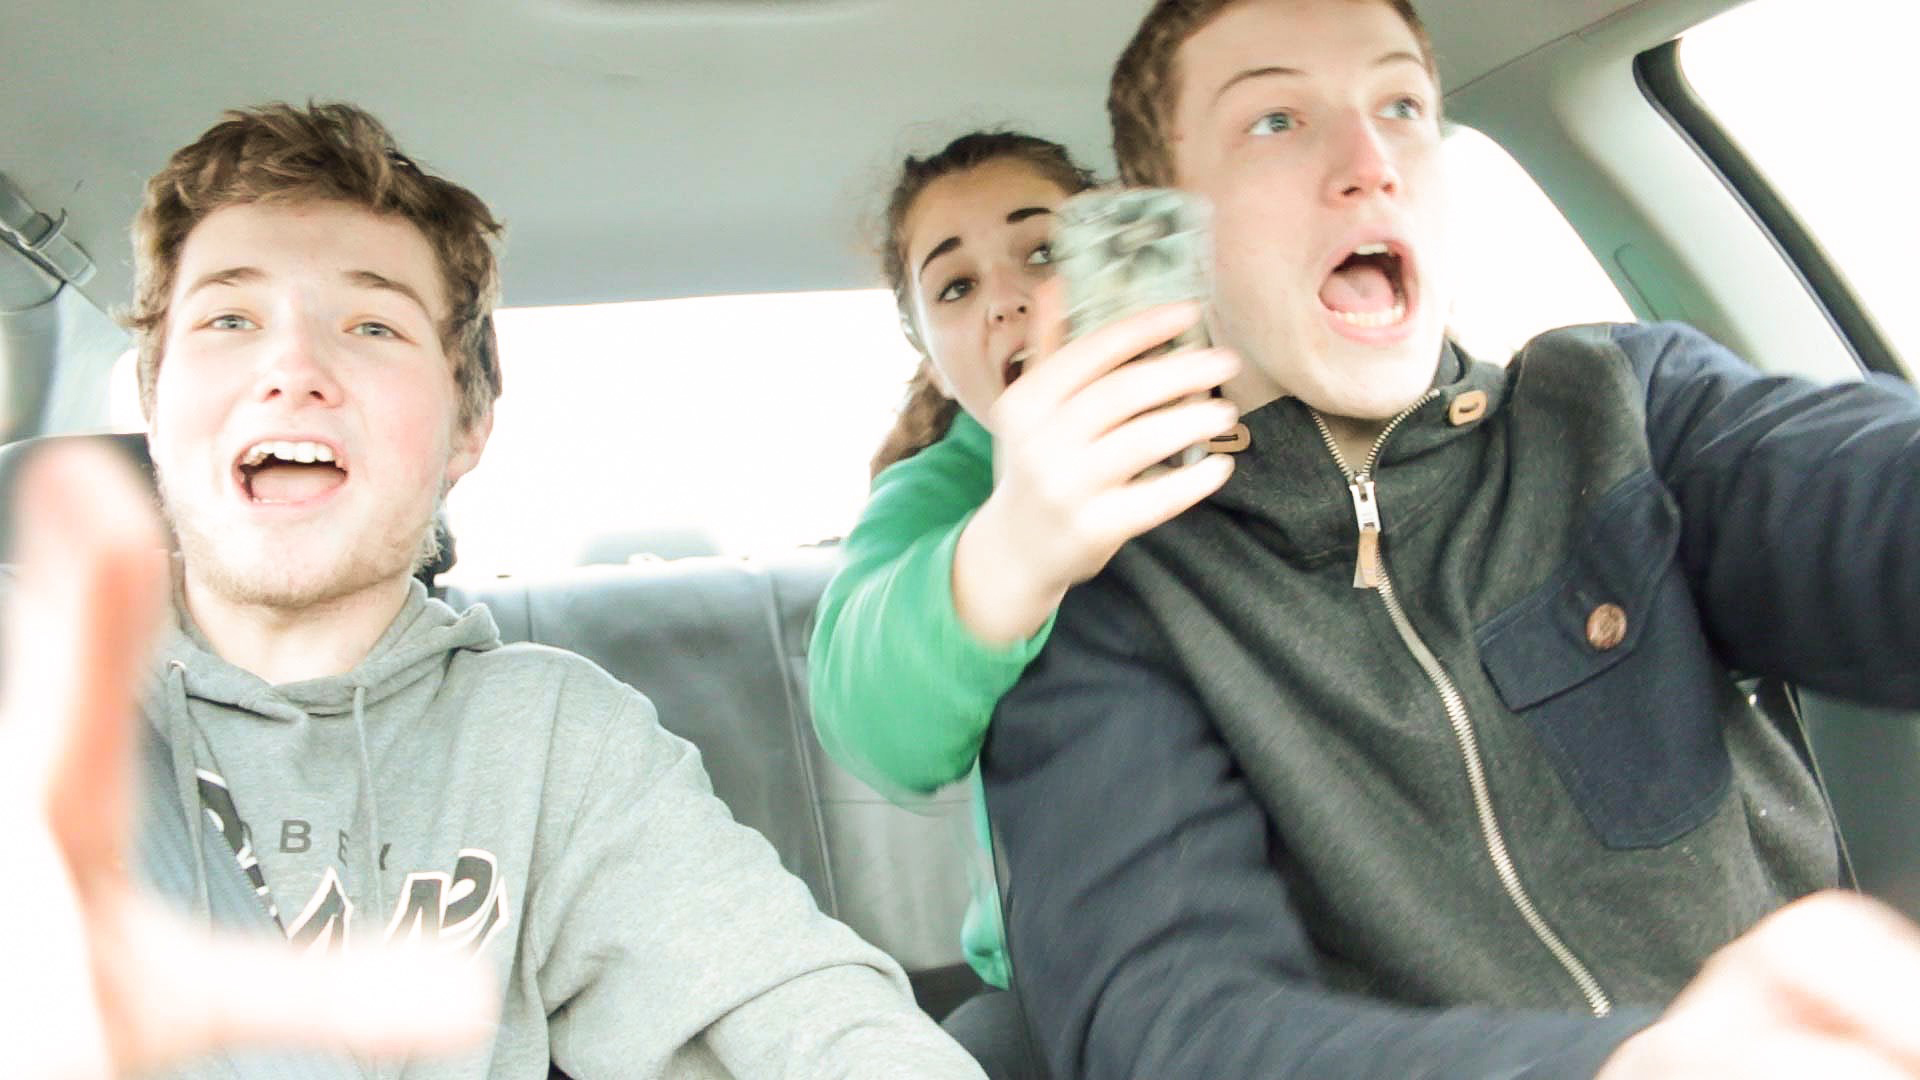 Liam Somers, Lyndsay Brown and Johann Kallelid scream as they are about to be in a car crash as a result of distracted driving in a still from their Toyota TeenDrive365 video entry. The Homer teens’ video was chosen as one of the top 10 out of more than 1,500 entries from across the United States.-Photo courtesy Liam Somers